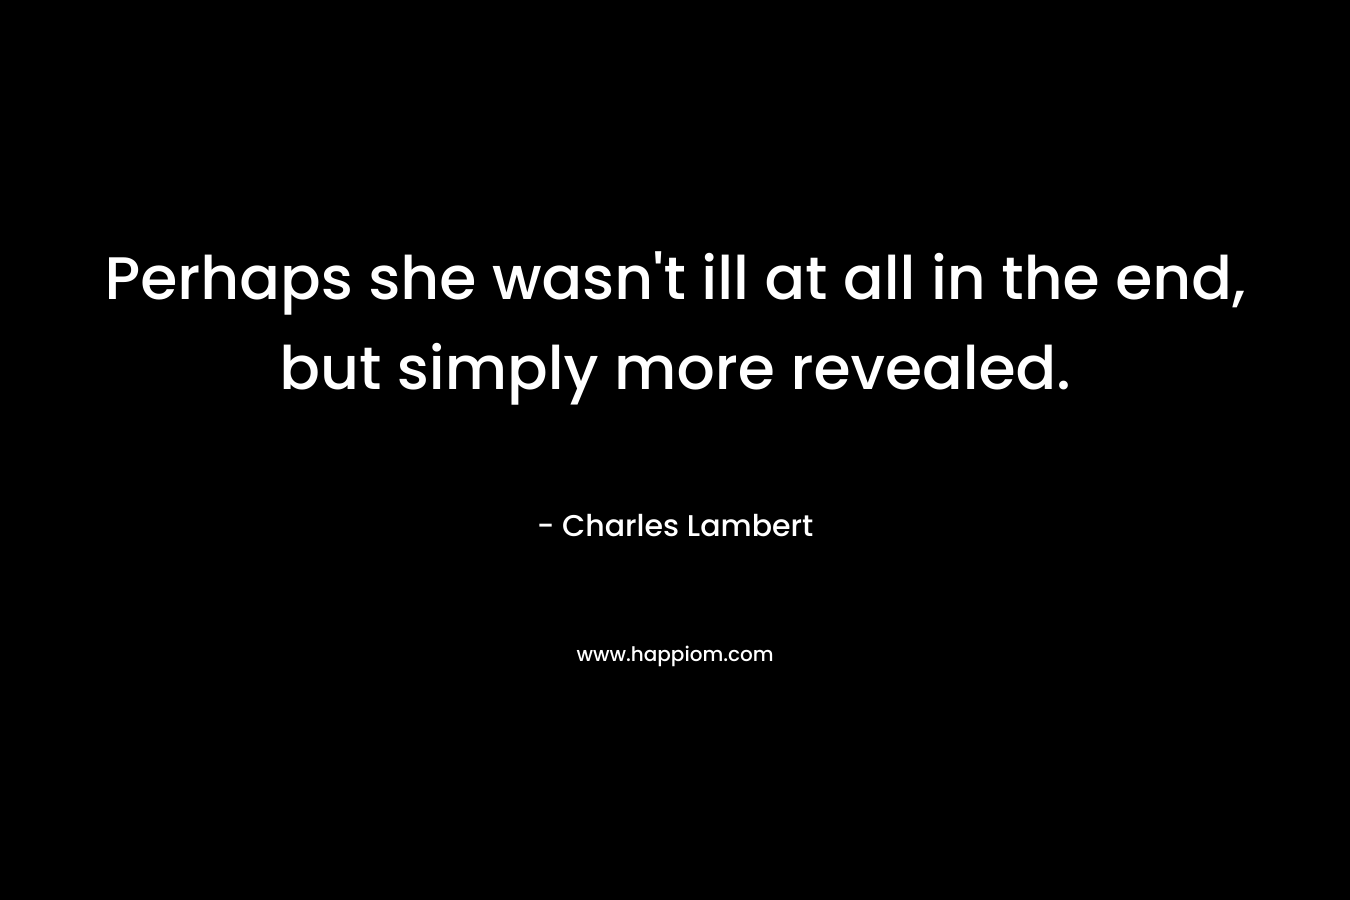 Perhaps she wasn’t ill at all in the end, but simply more revealed. – Charles Lambert